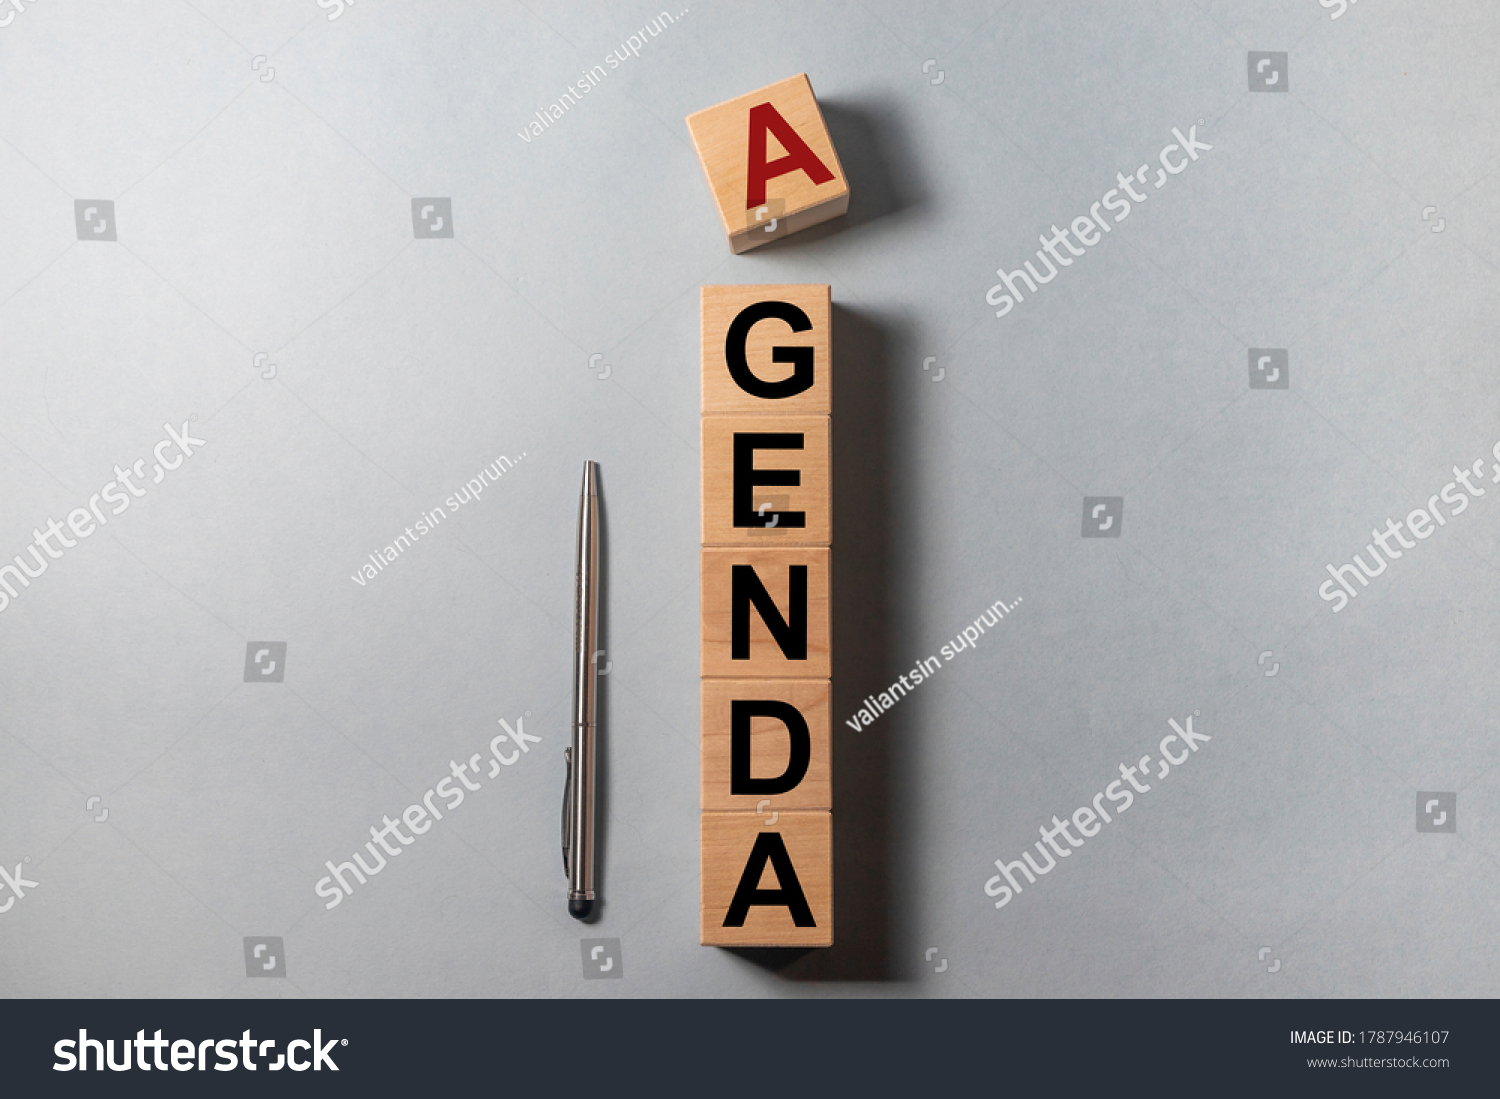 Agenda Meeting Appointment Activity Information Concept, agenda word #1787946107